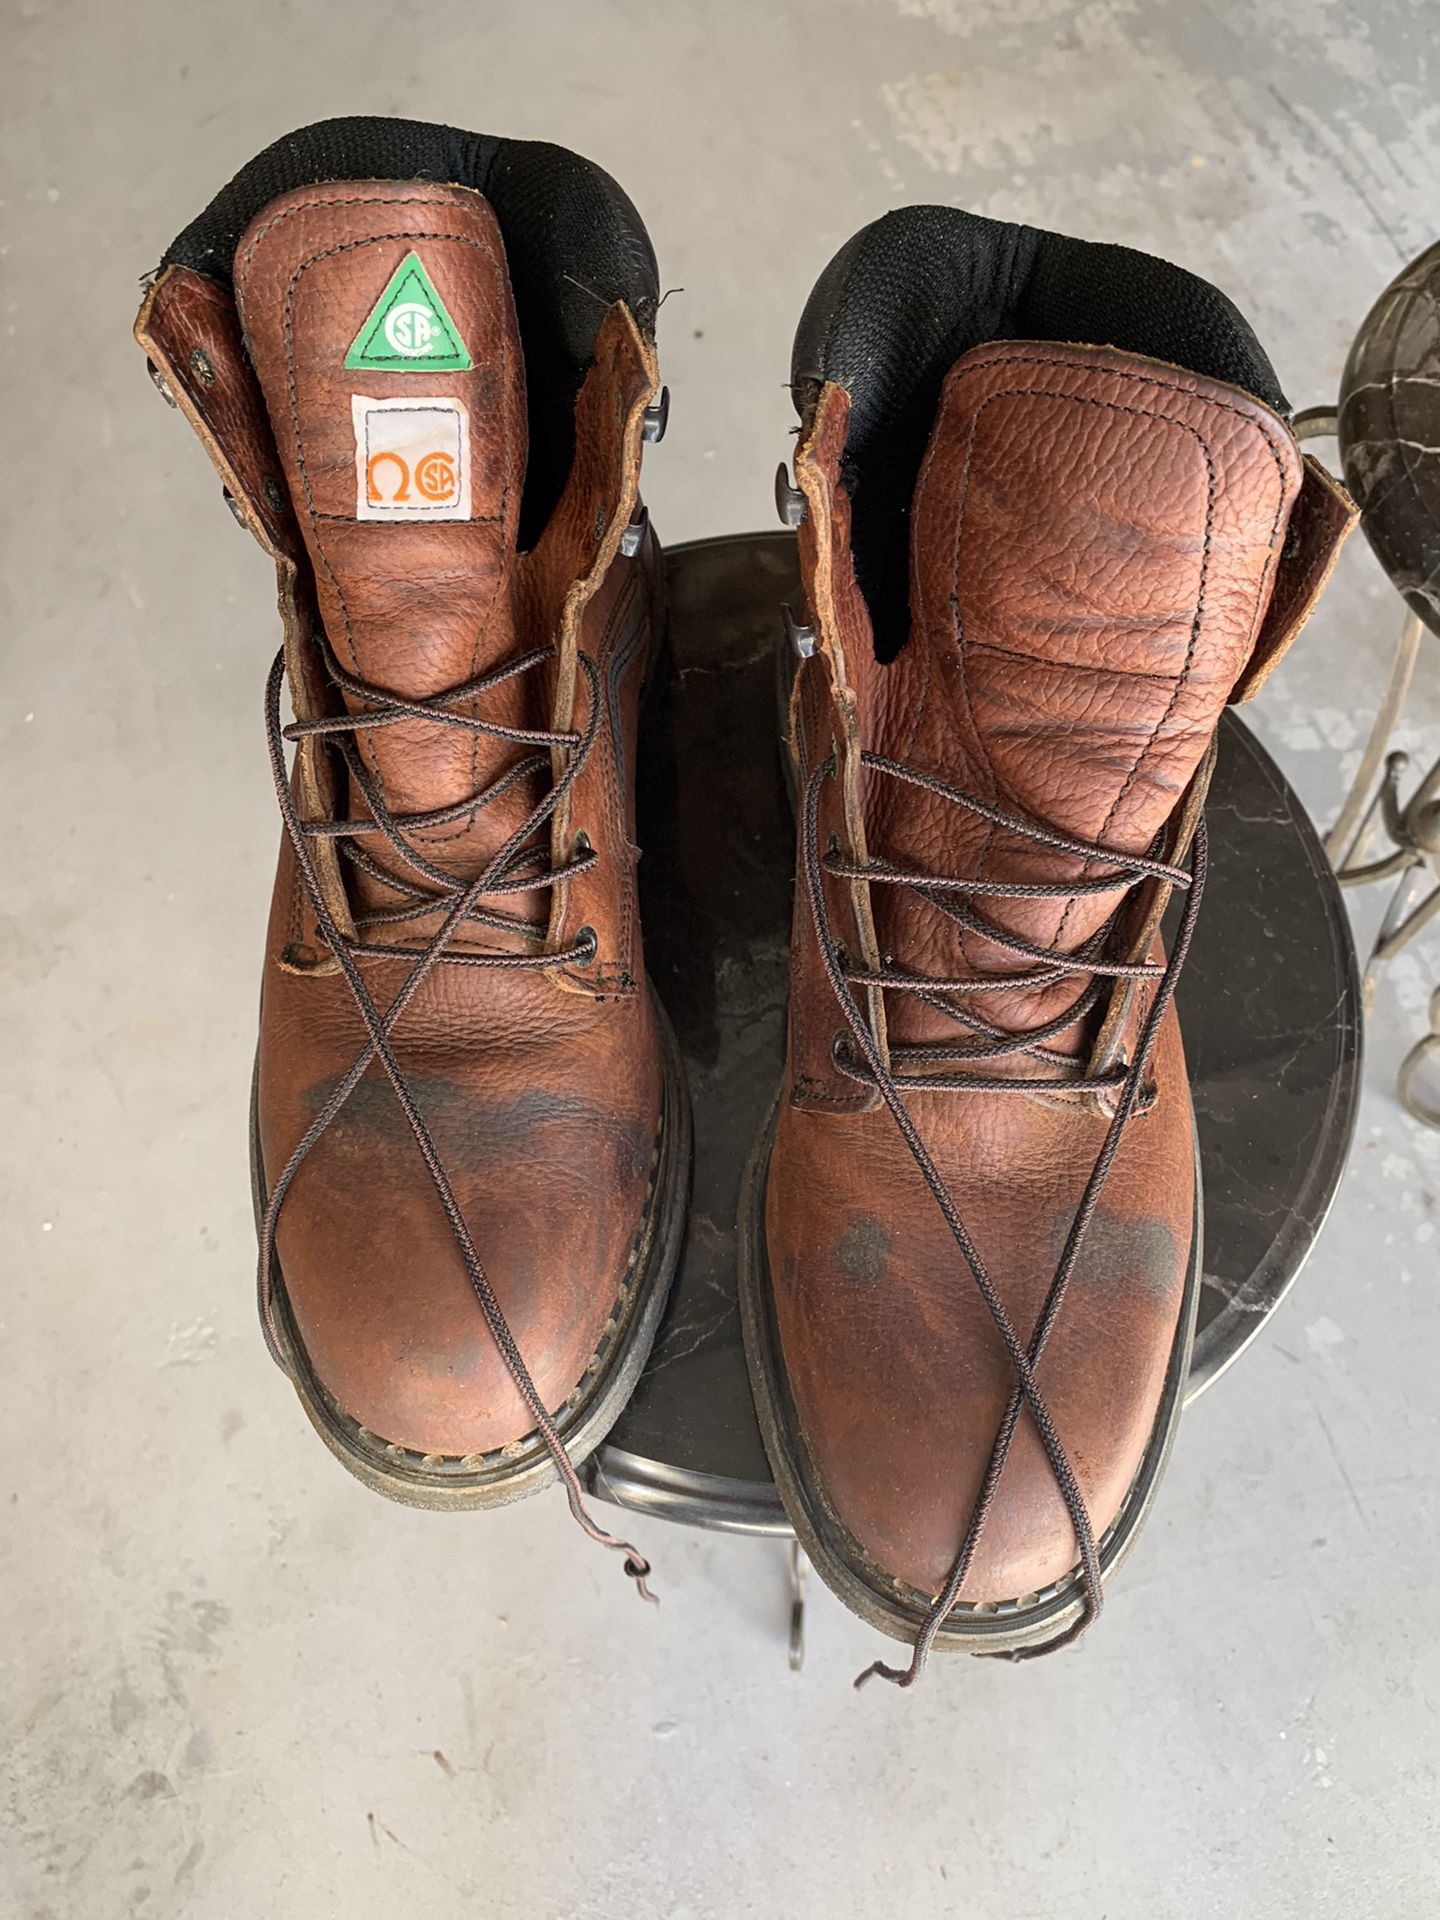 Men’s Red Wing Work Boots / Shoes